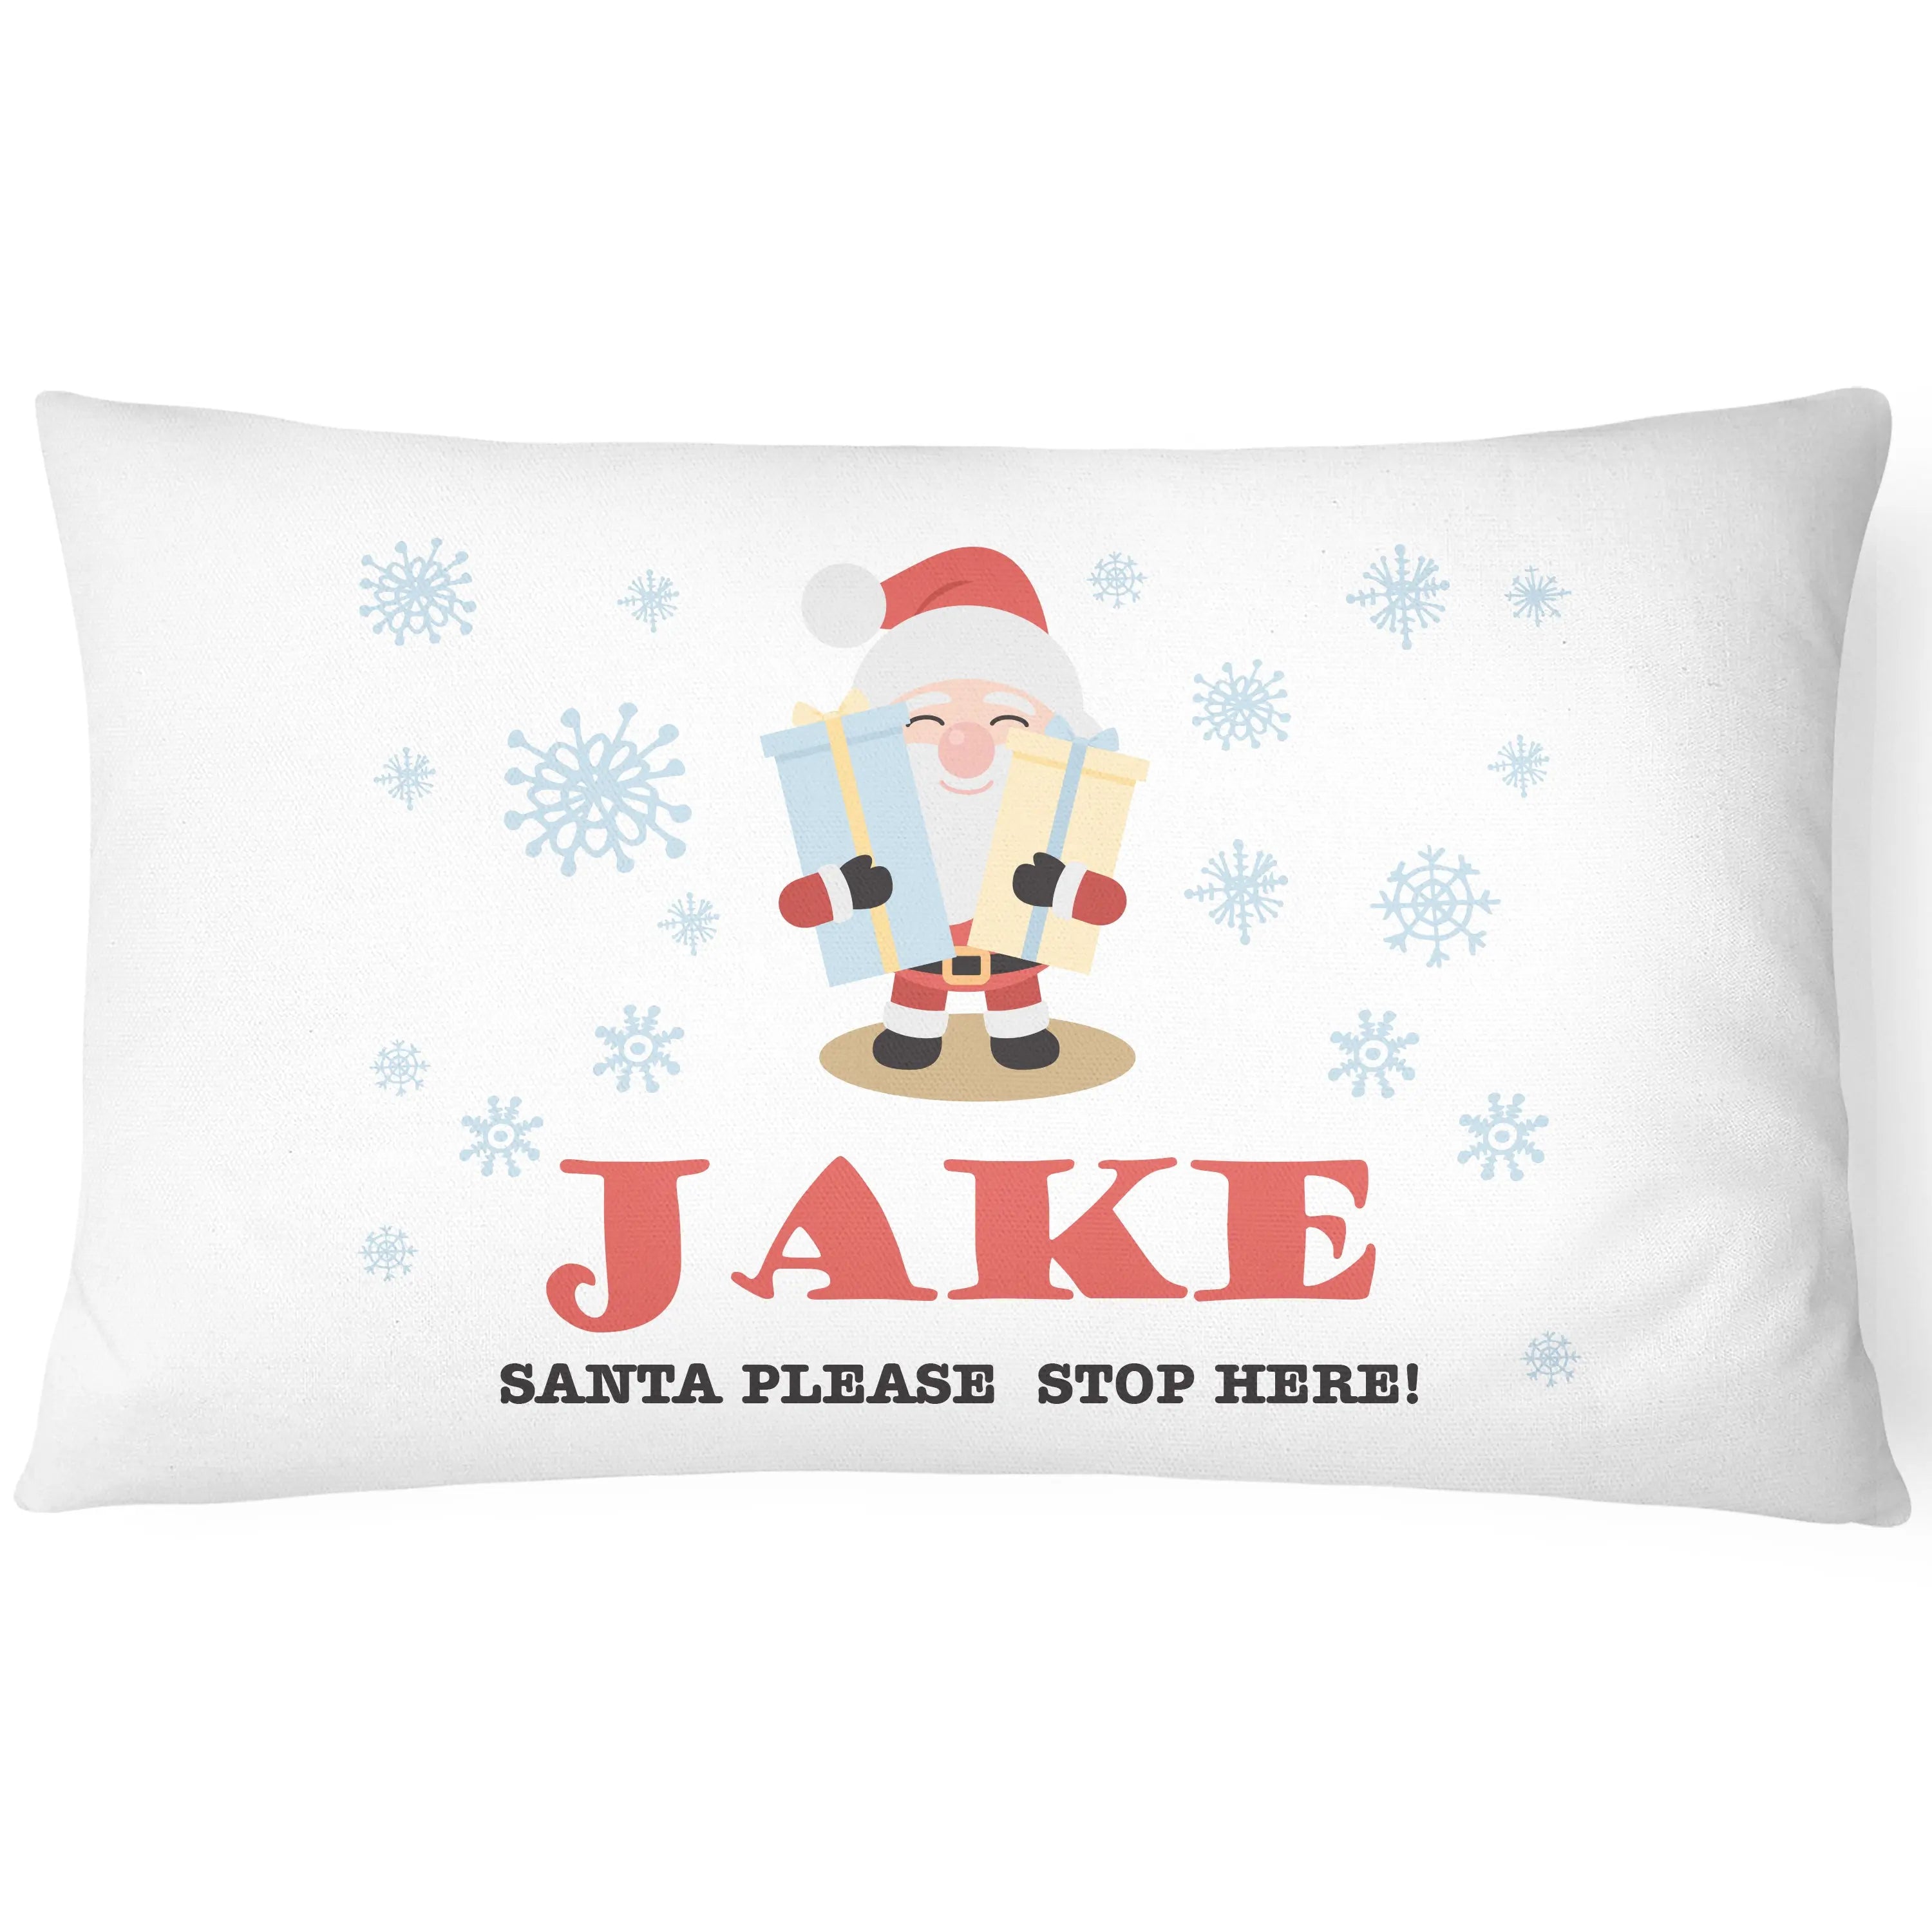 Christmas Pillowcase for Kids - Personalise With Any Name - Perfect Children's Gift - Santa - CushionPop